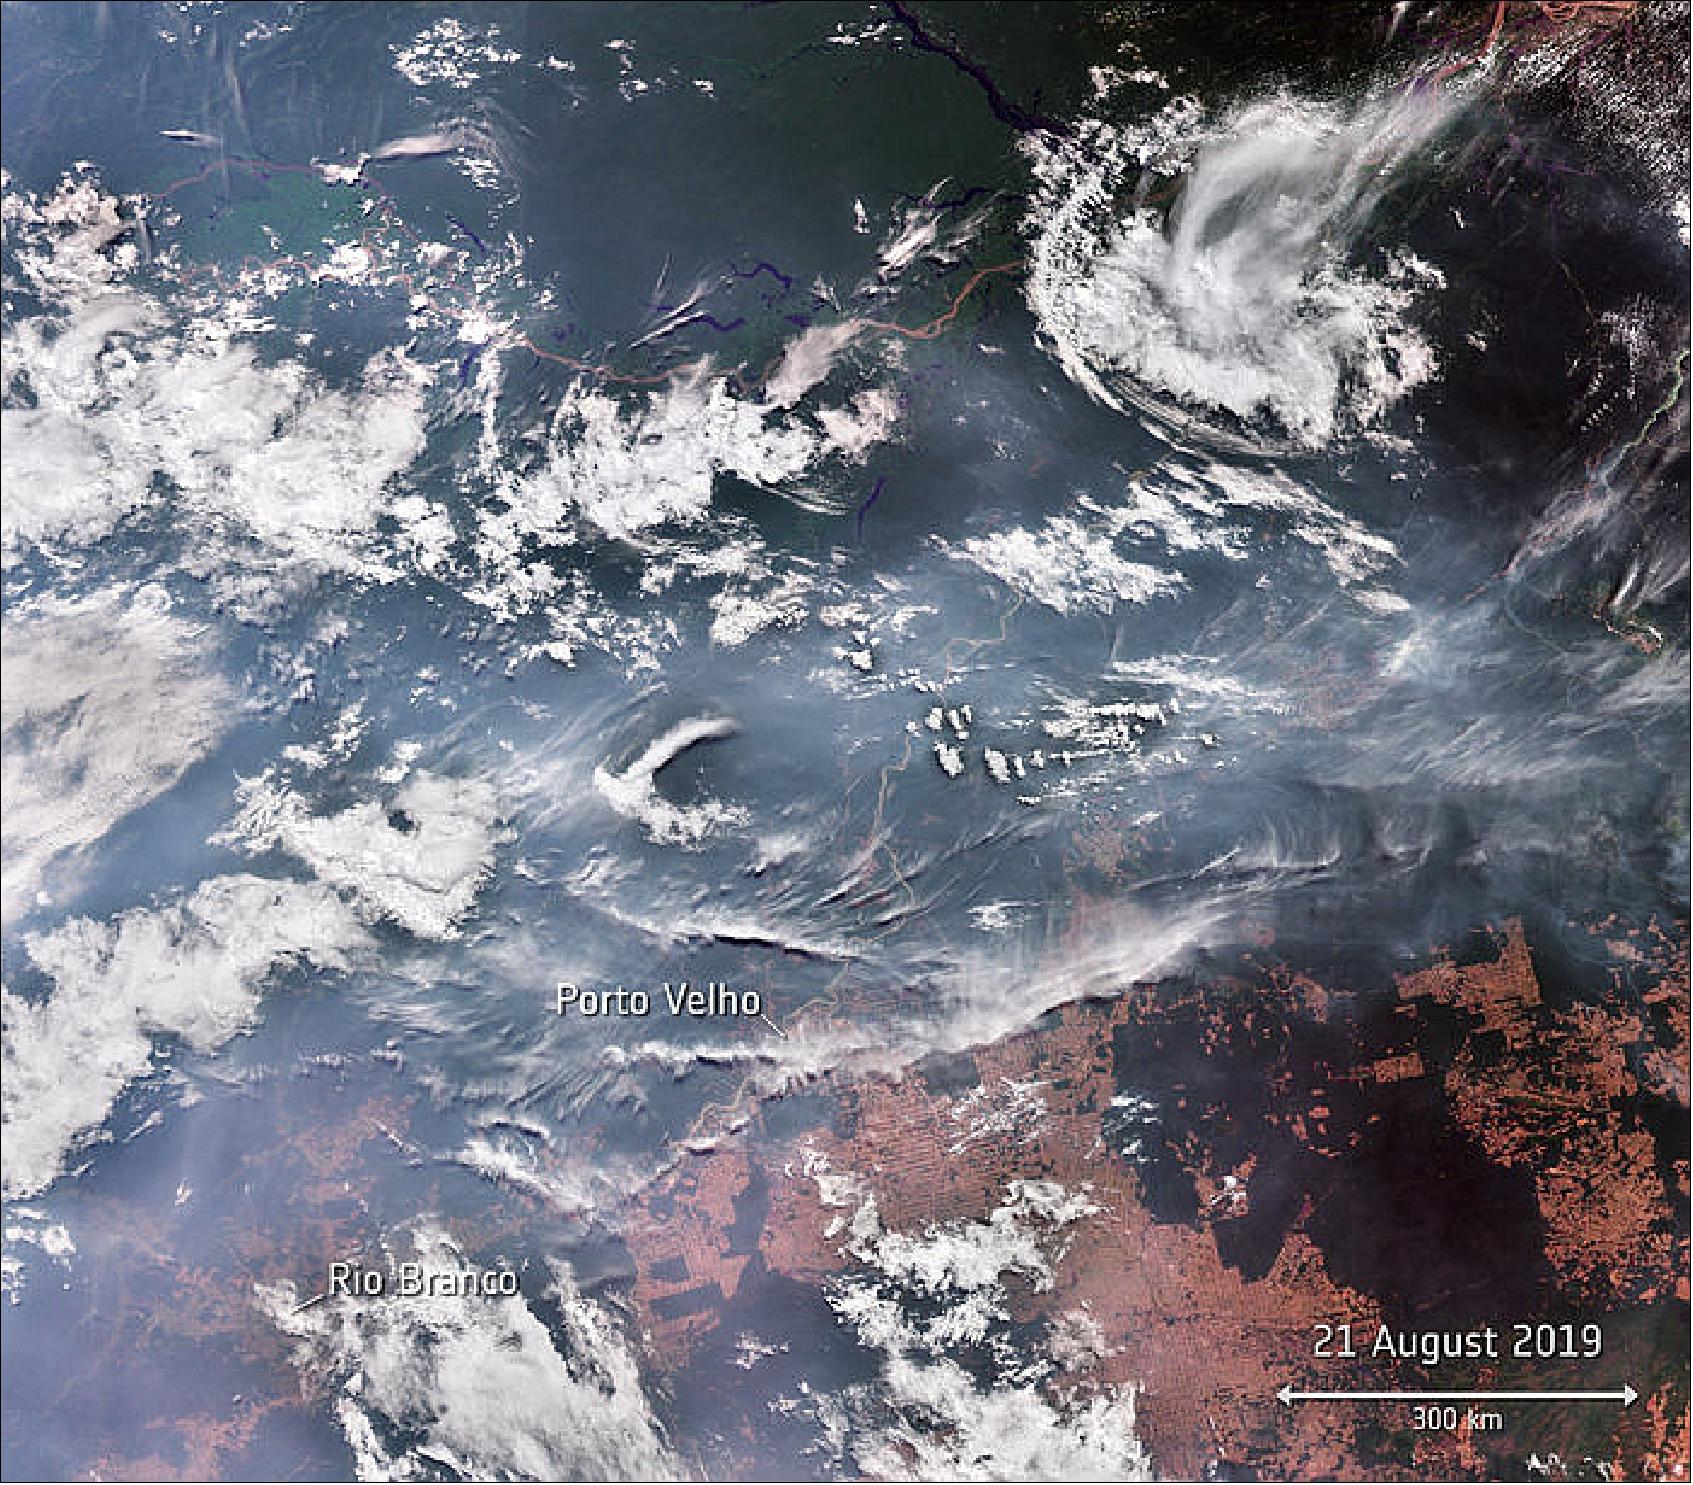 Figure 9: Wildfires in Brazil from Copernicus Sentinel-3. An unprecedented amount of fires have broken out in Brazil’s Amazon rainforest. In this image, captured on 21 August 2019, the fires and plumes of smoke can clearly be seen (image credit: ESA, the image contains modified Copernicus Sentinel data (2019), processed by ESA, CC BY-SA 3.0 IGO)